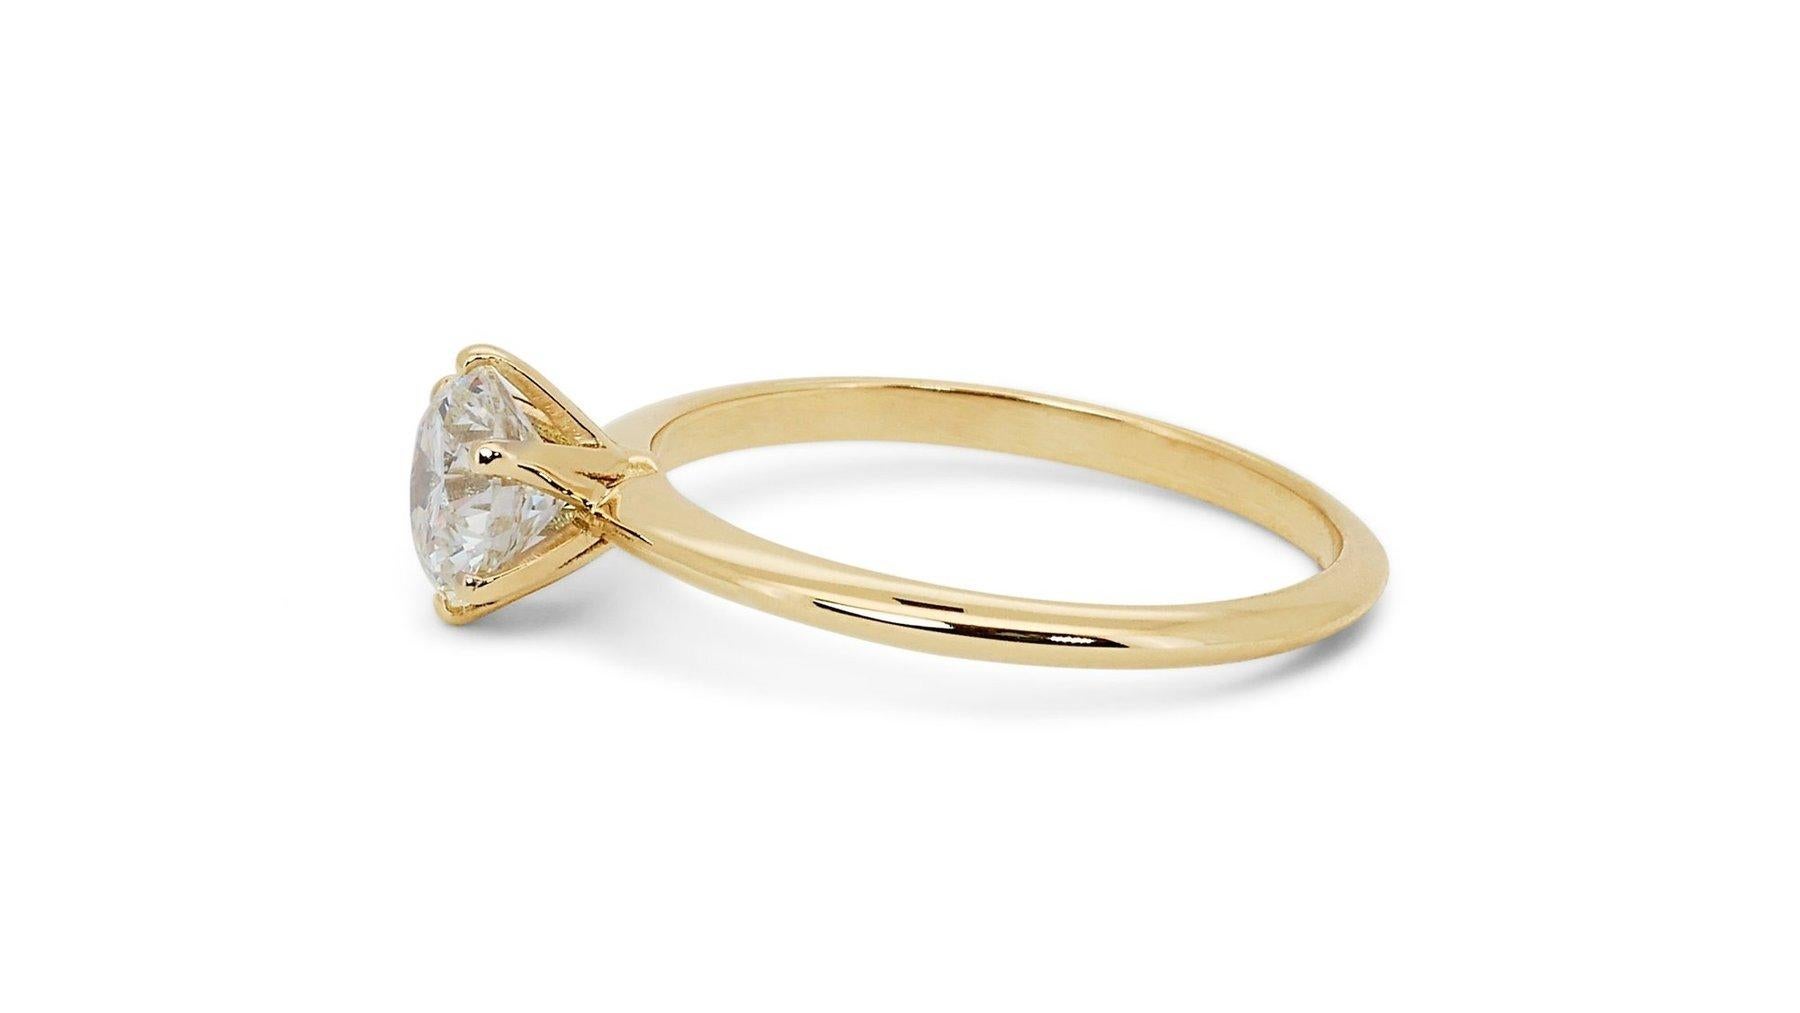 Lustrous 1.07ct Diamond Solitaire Ring in 18k Yellow Gold - GIA Certified For Sale 1